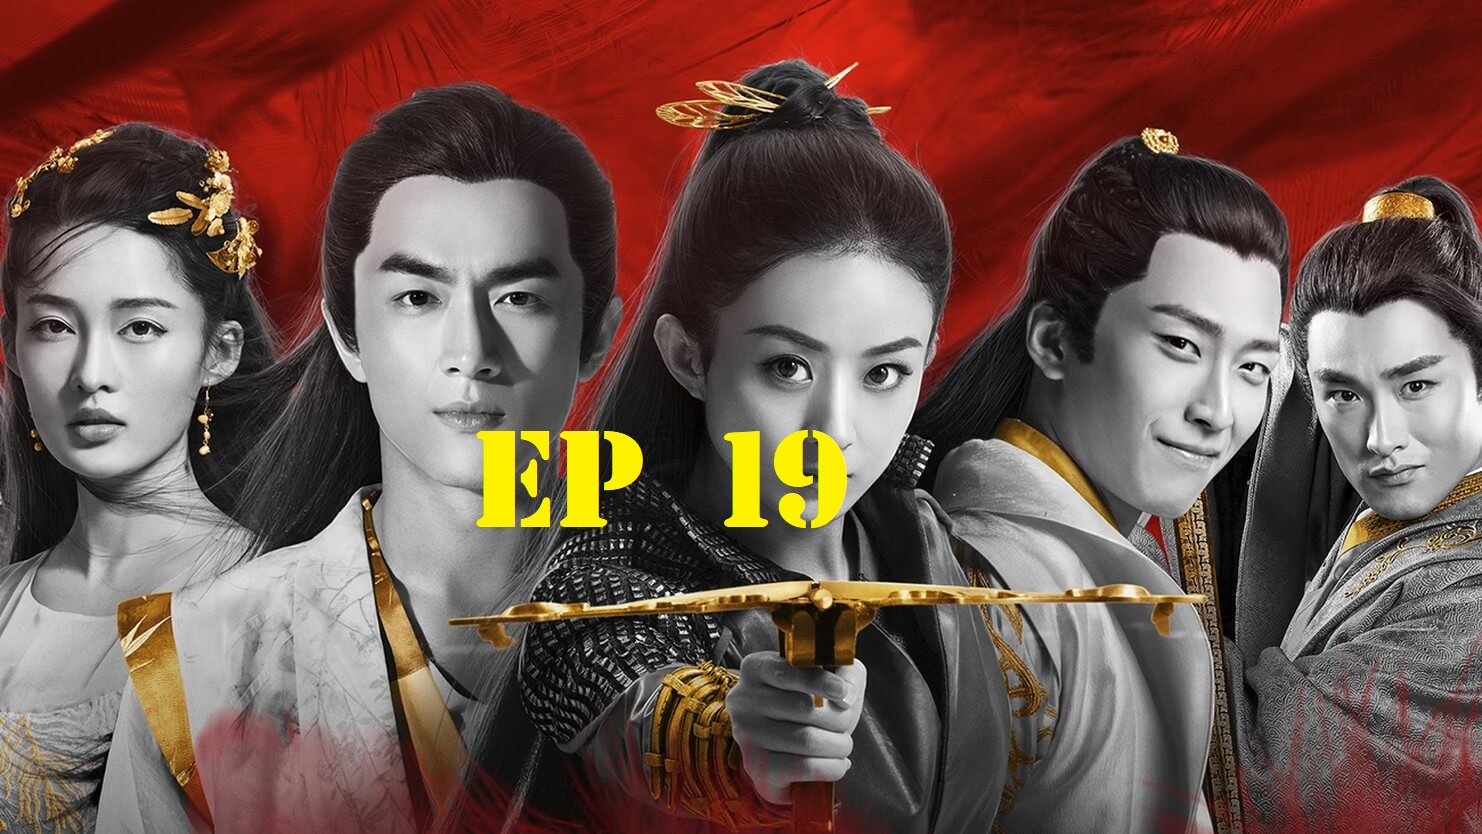 Princess Agents 【ENG SUB】Official Chinese Drama 2017 特工皇妃楚 ...